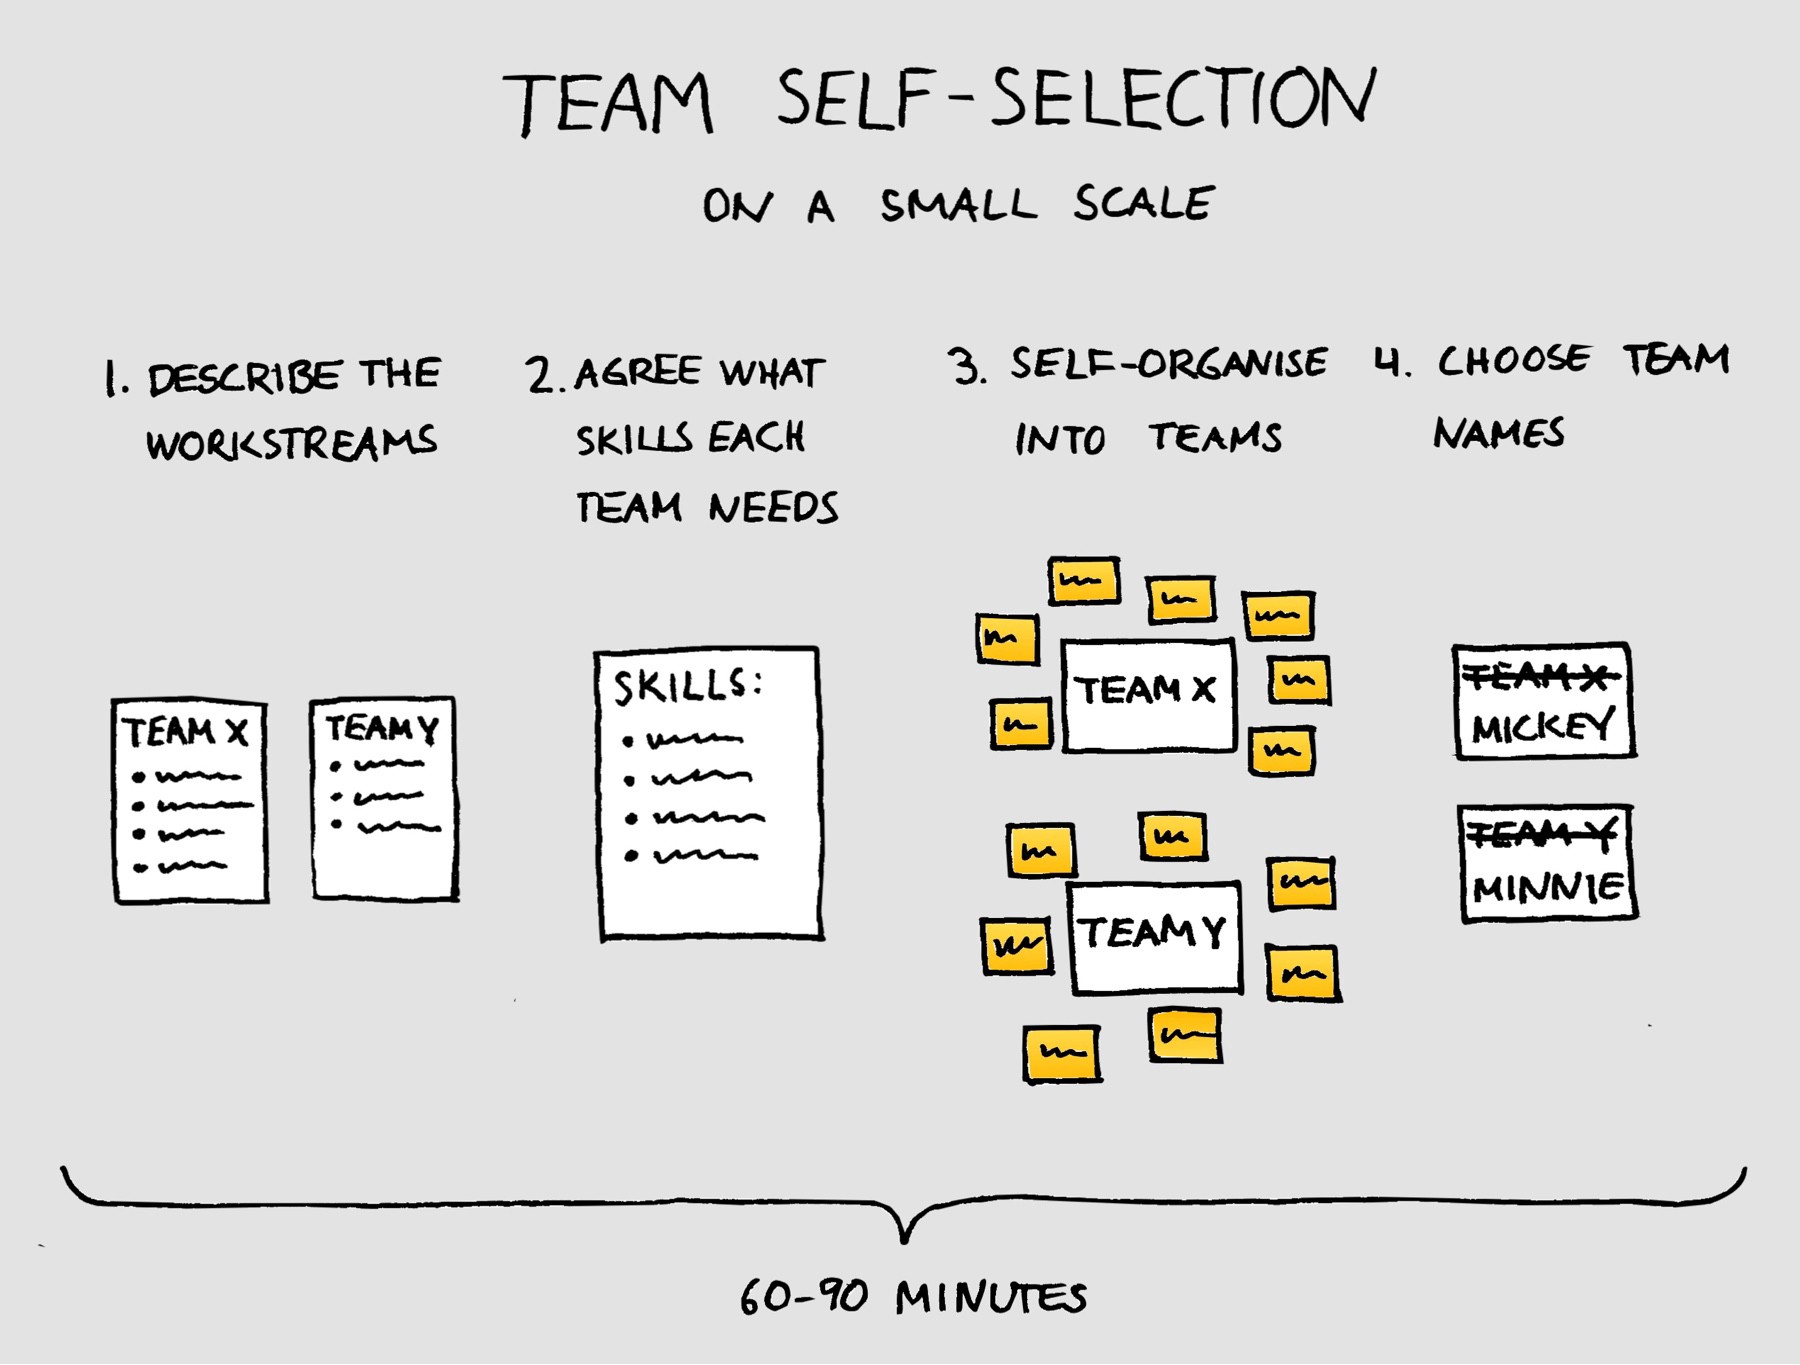 The structure of the self-selection workshop